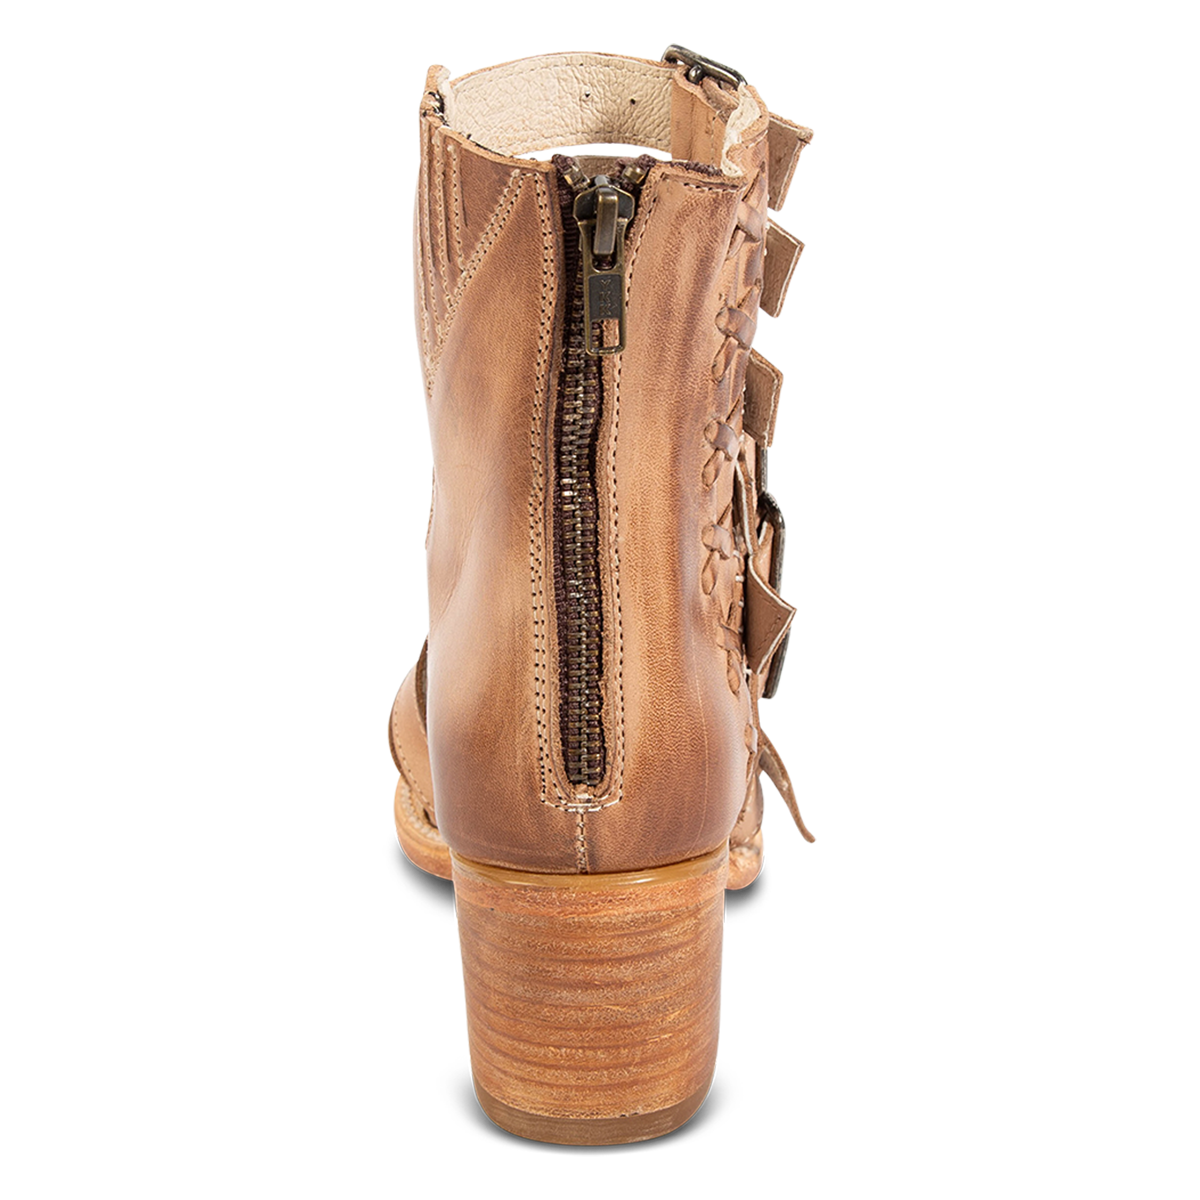 Back view showing a stacked heel and a working brass zipper on FREEBIRD women's Country natural leather sandal